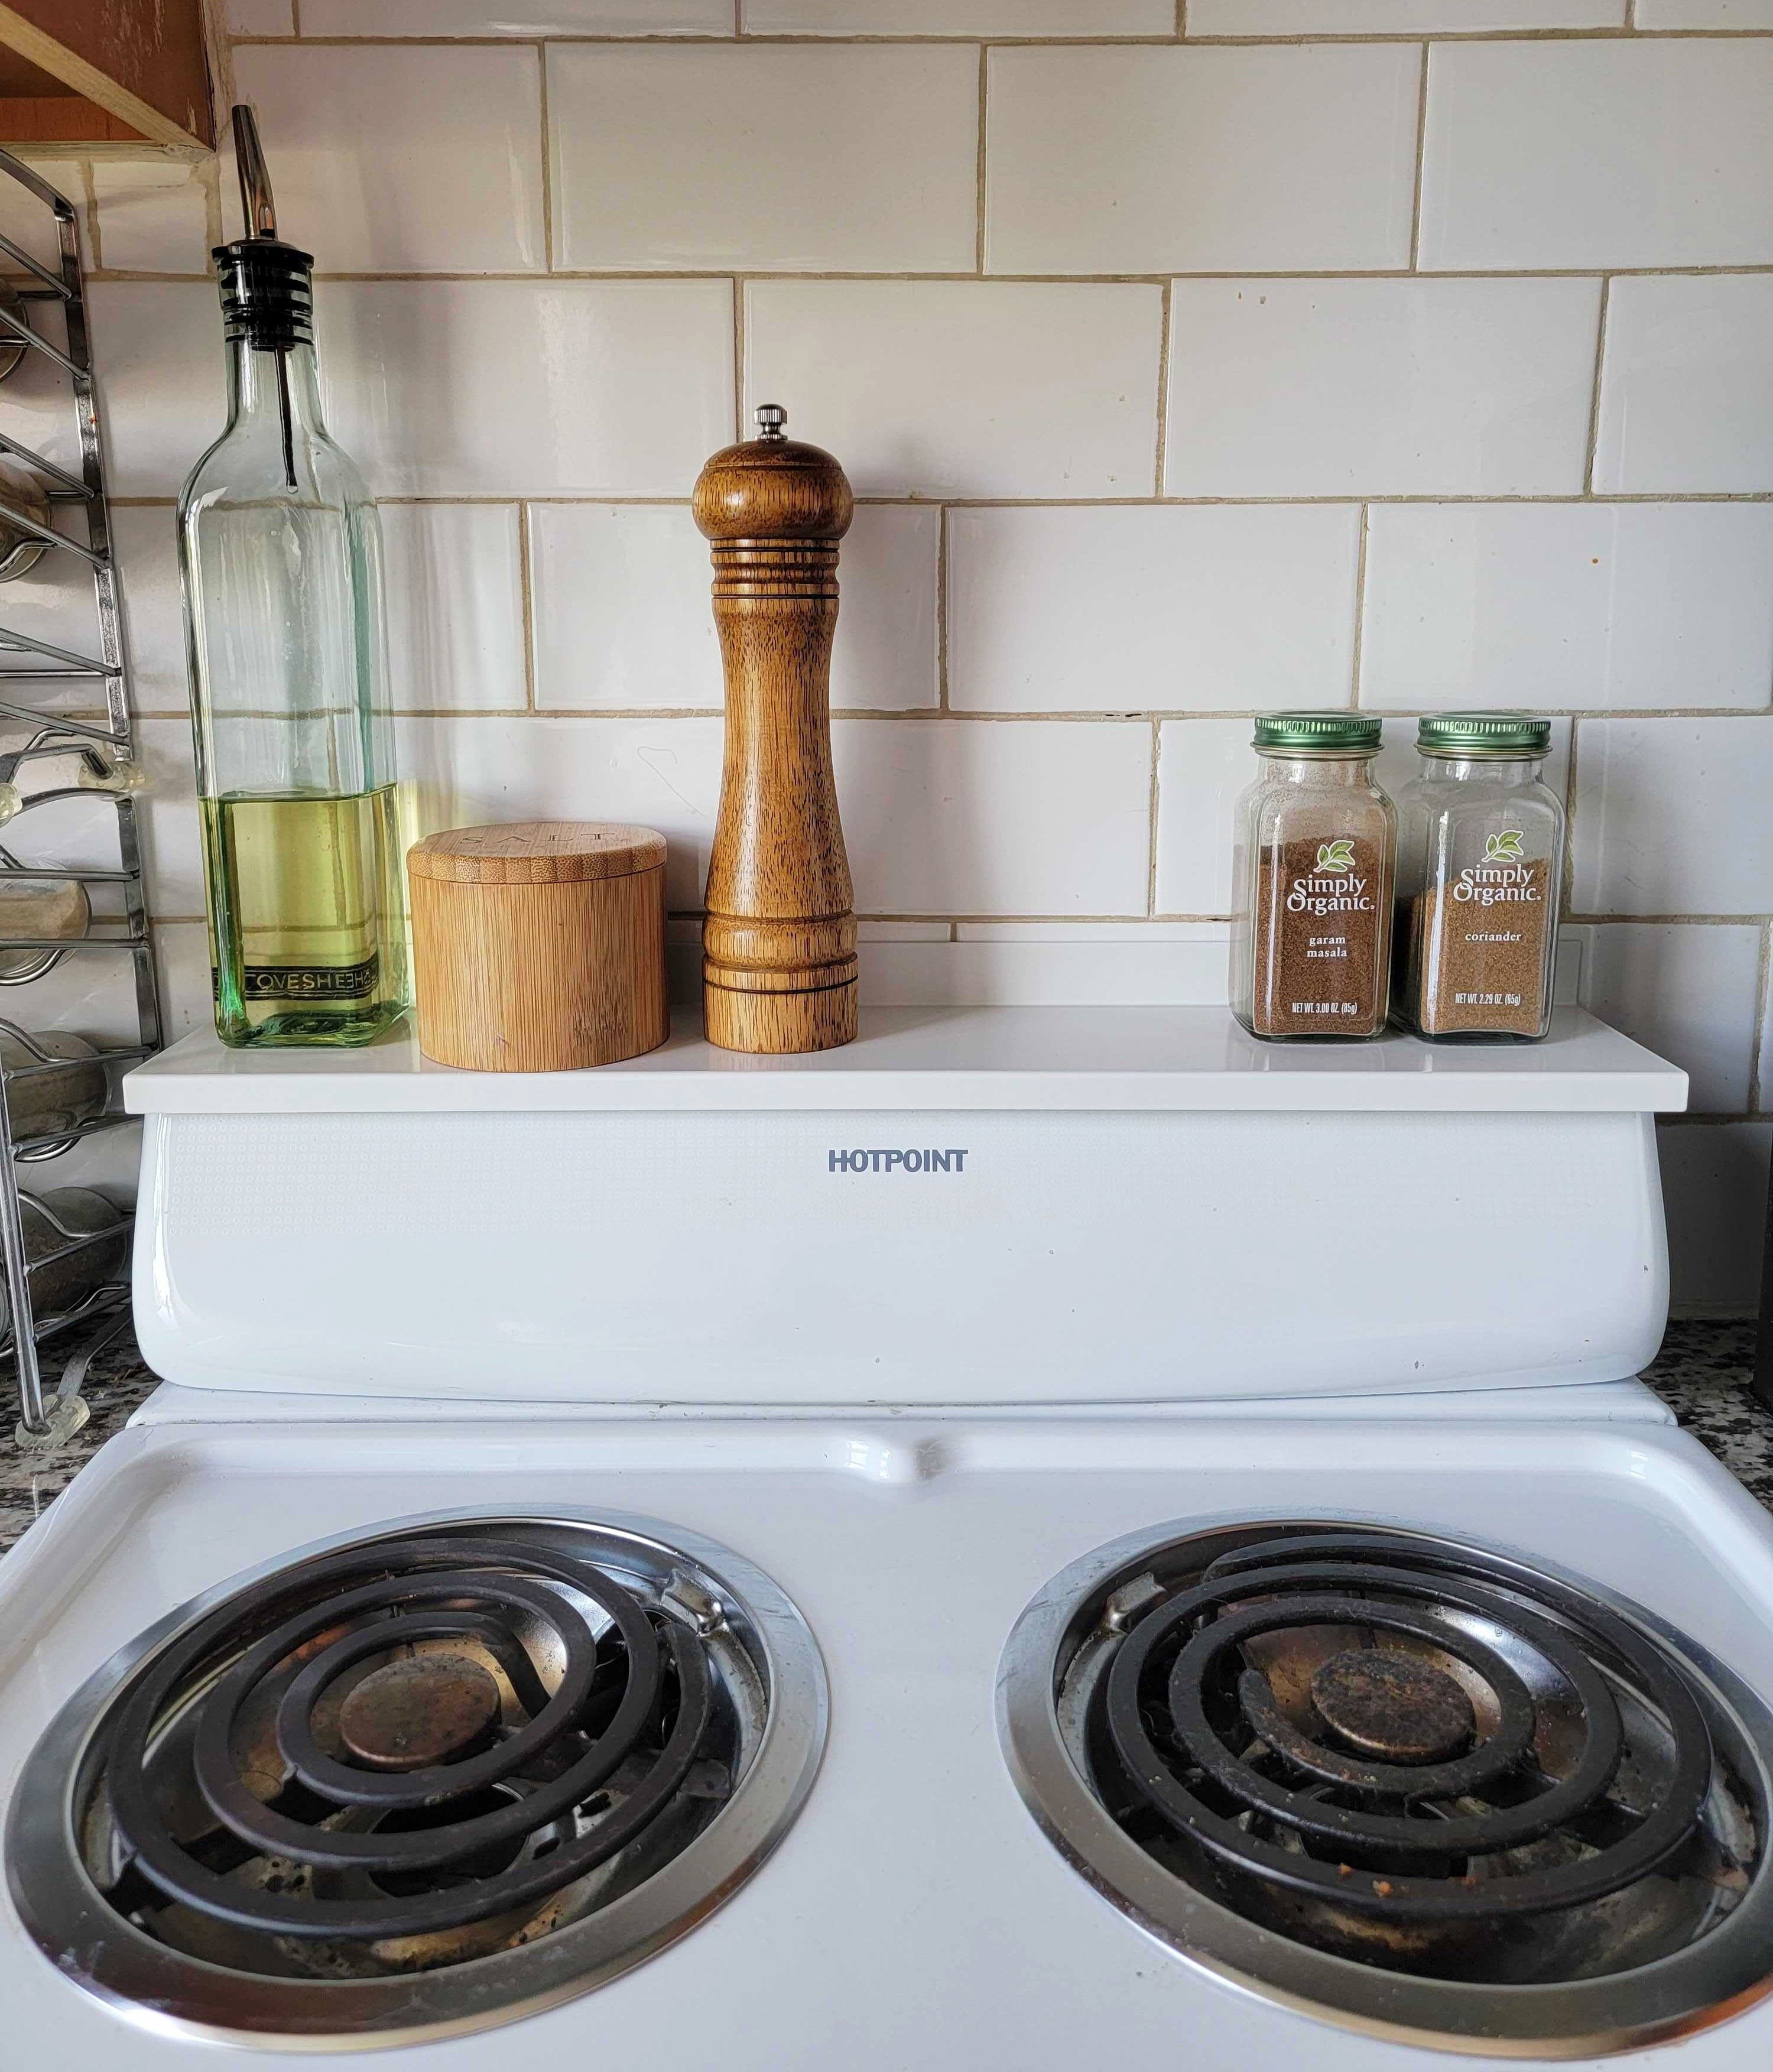 A clean stove with condiments and oil bottles on the stove shelf 